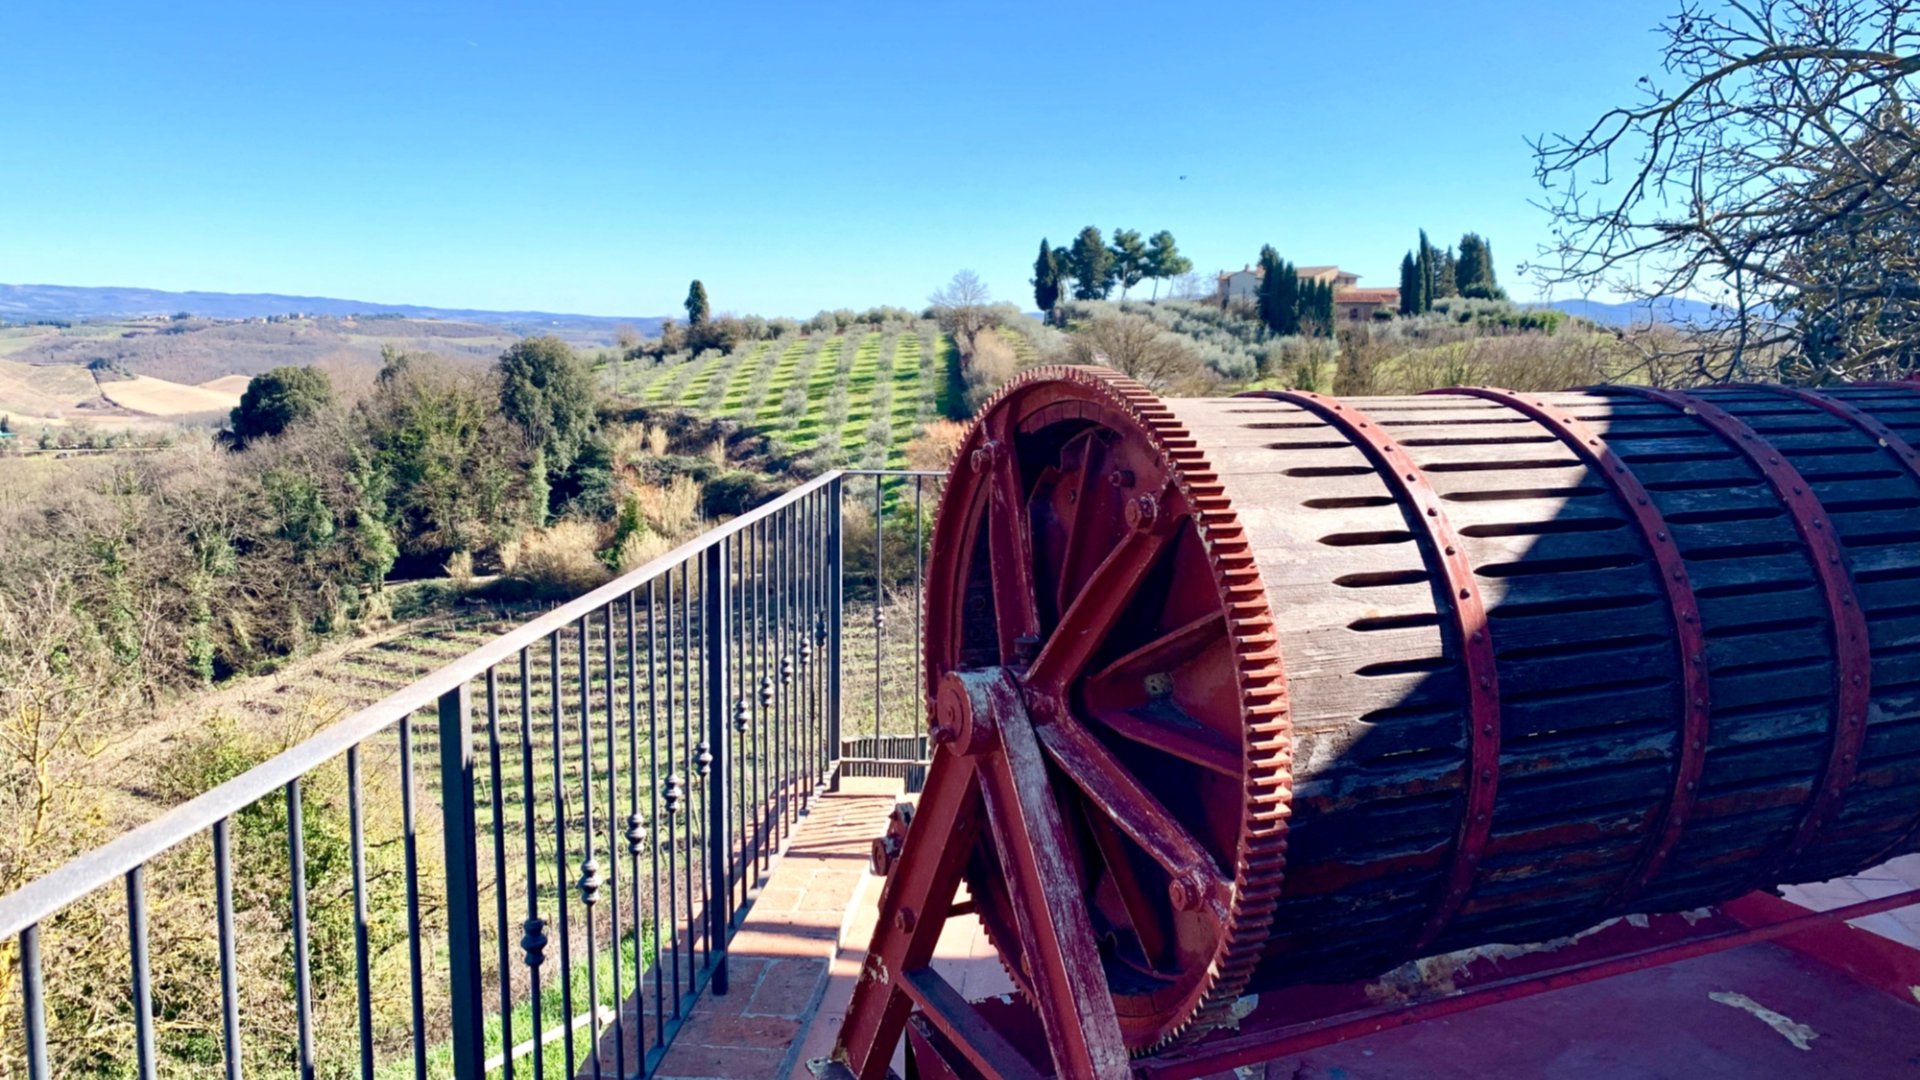 From Florence to Chianti area guided tour to visit a winery